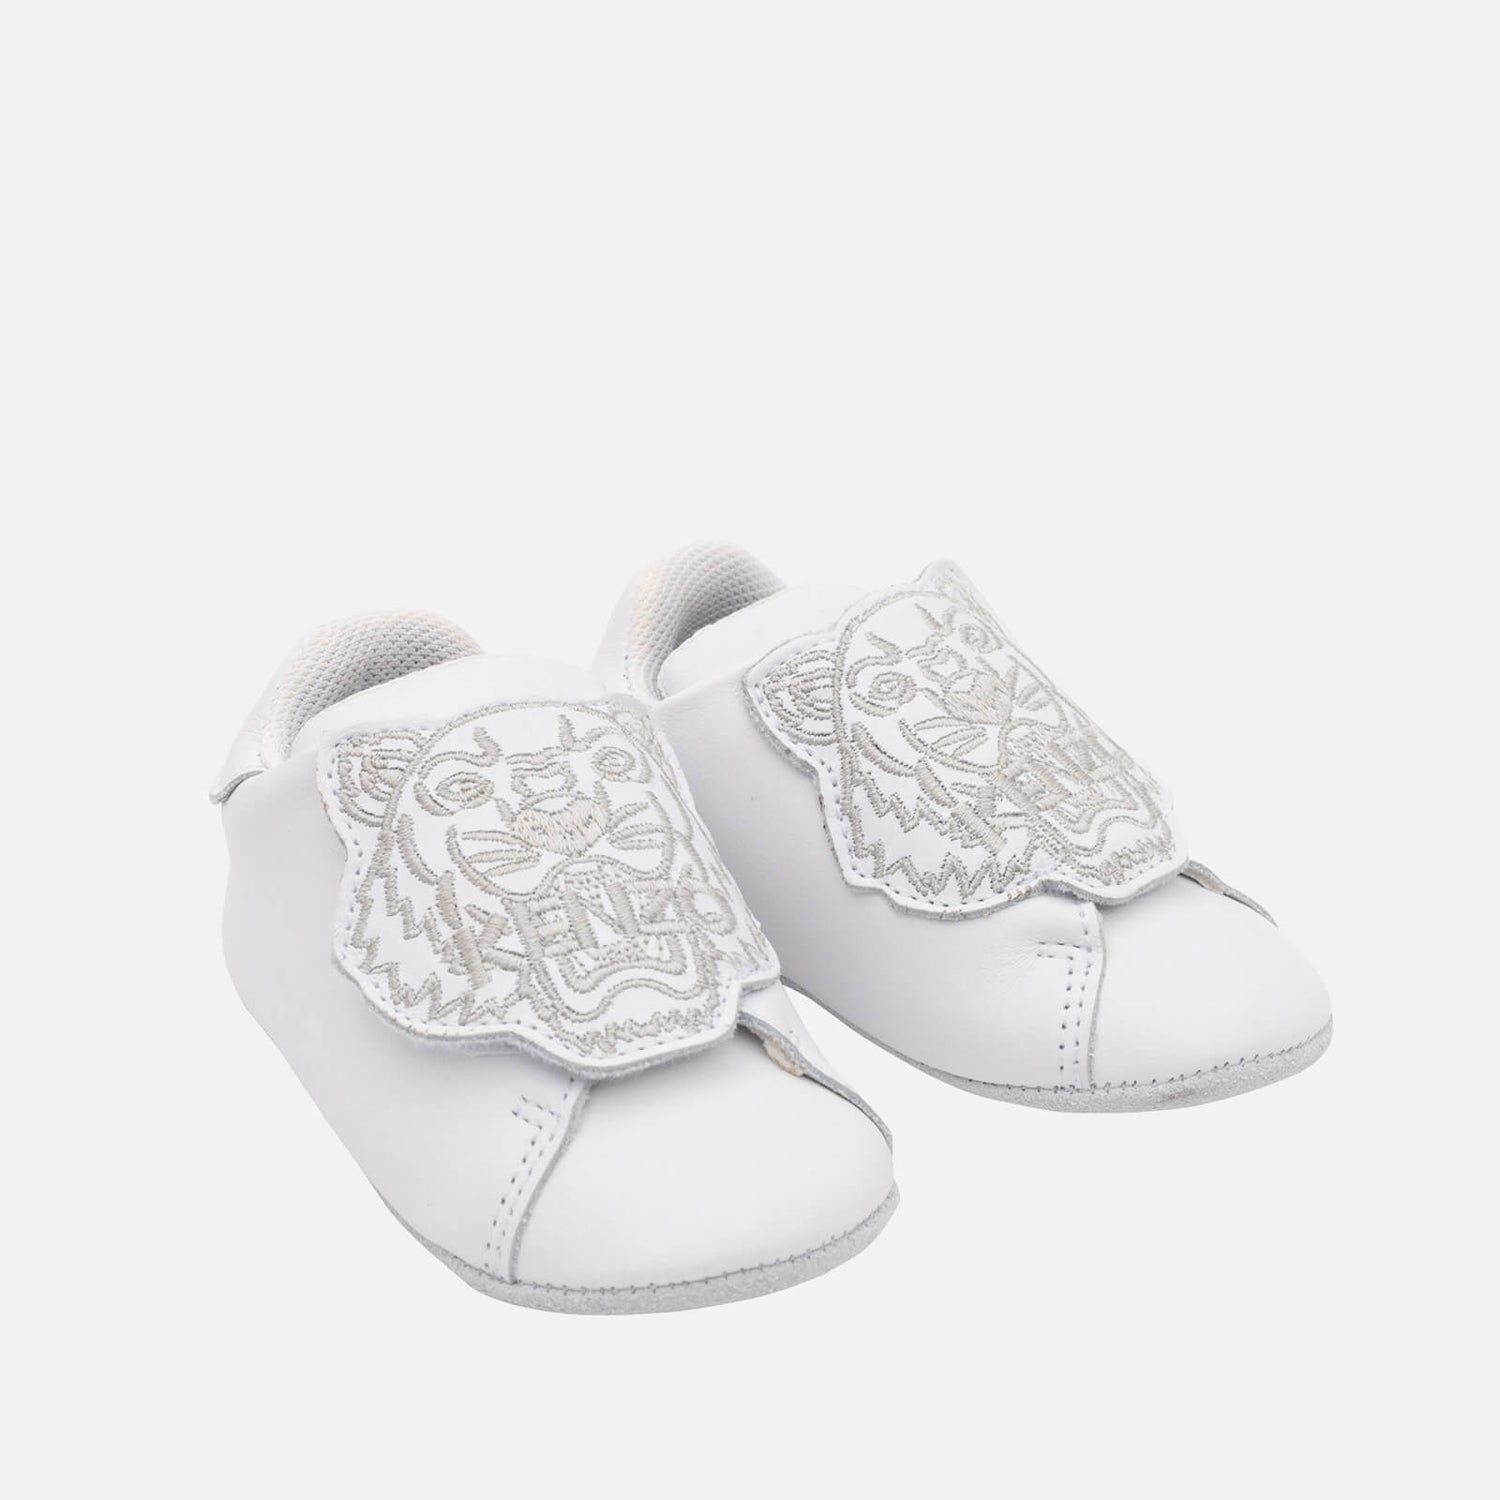 KENZO Babies' Leather Slippers